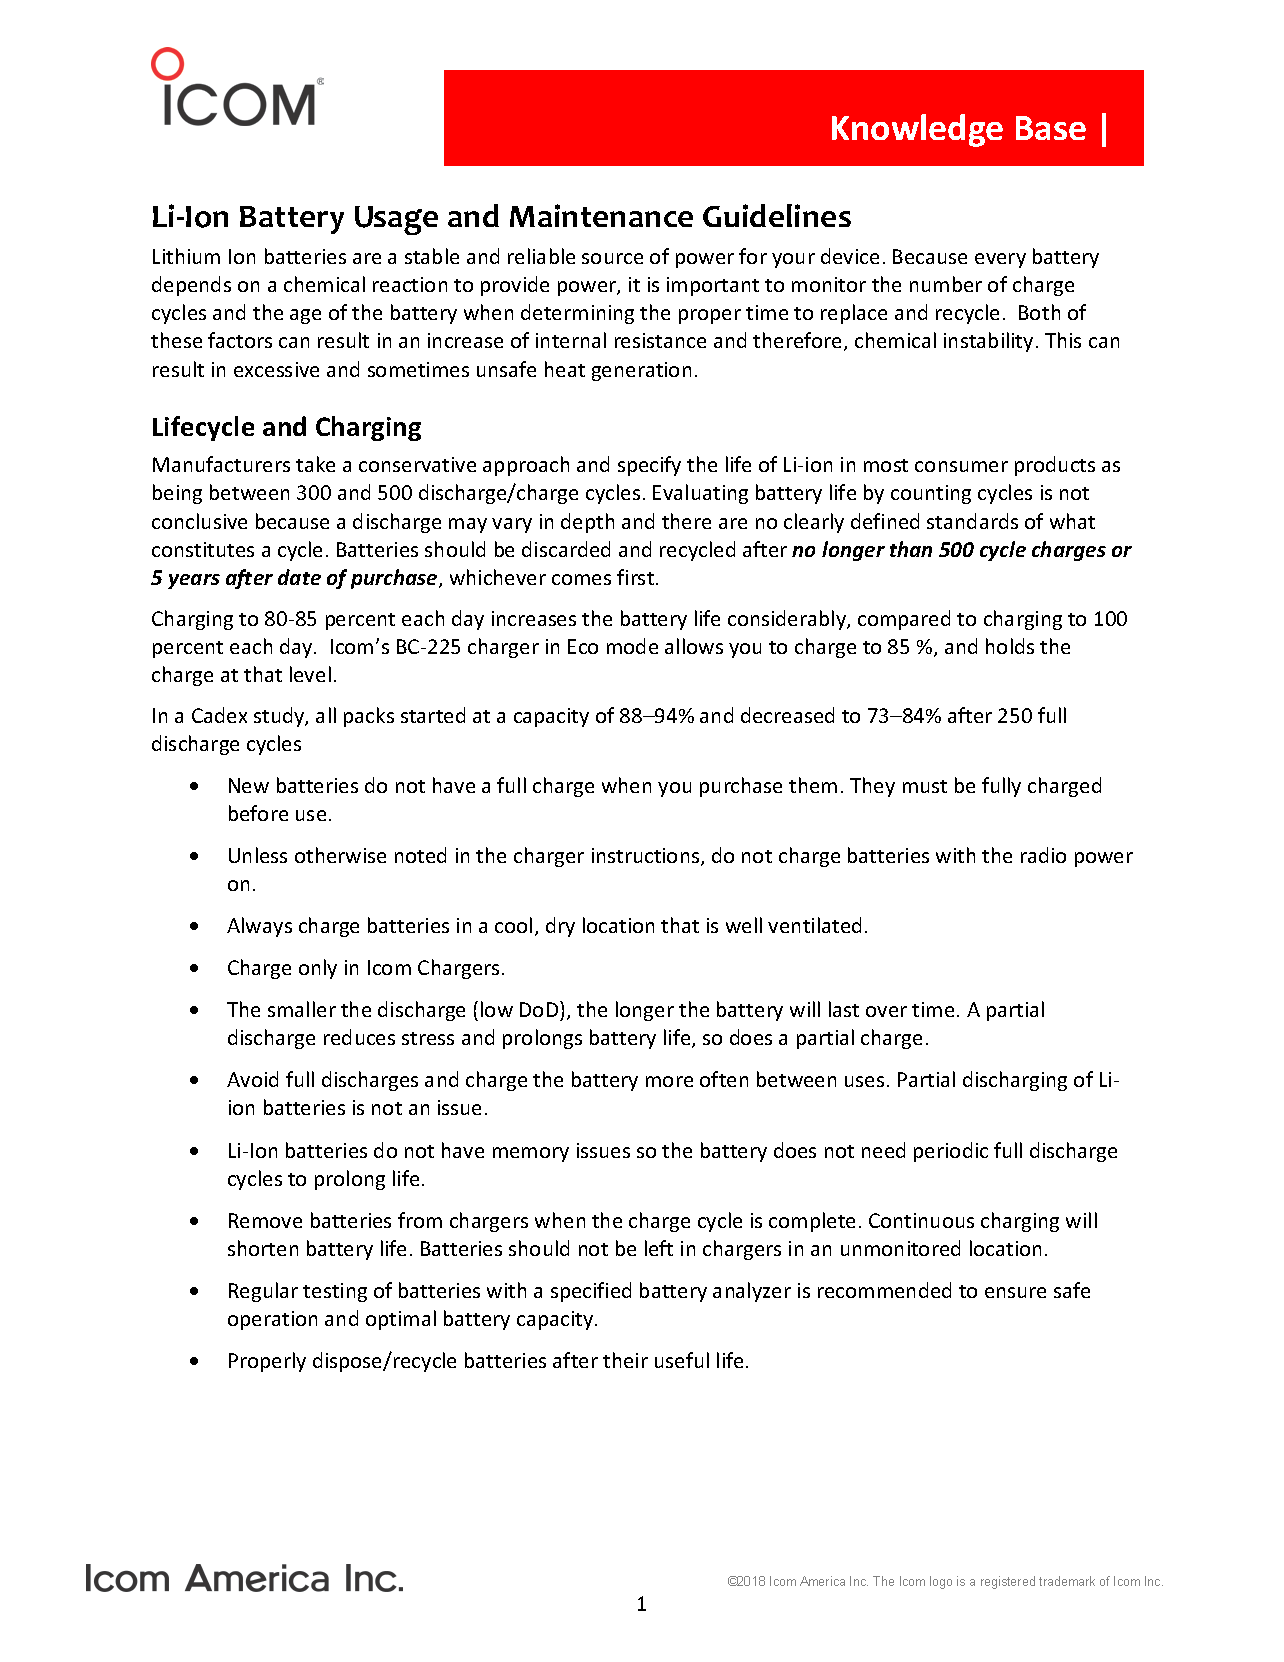 Lithium-Ion_Battery_Maintenance_Guidelines_Page_1.png